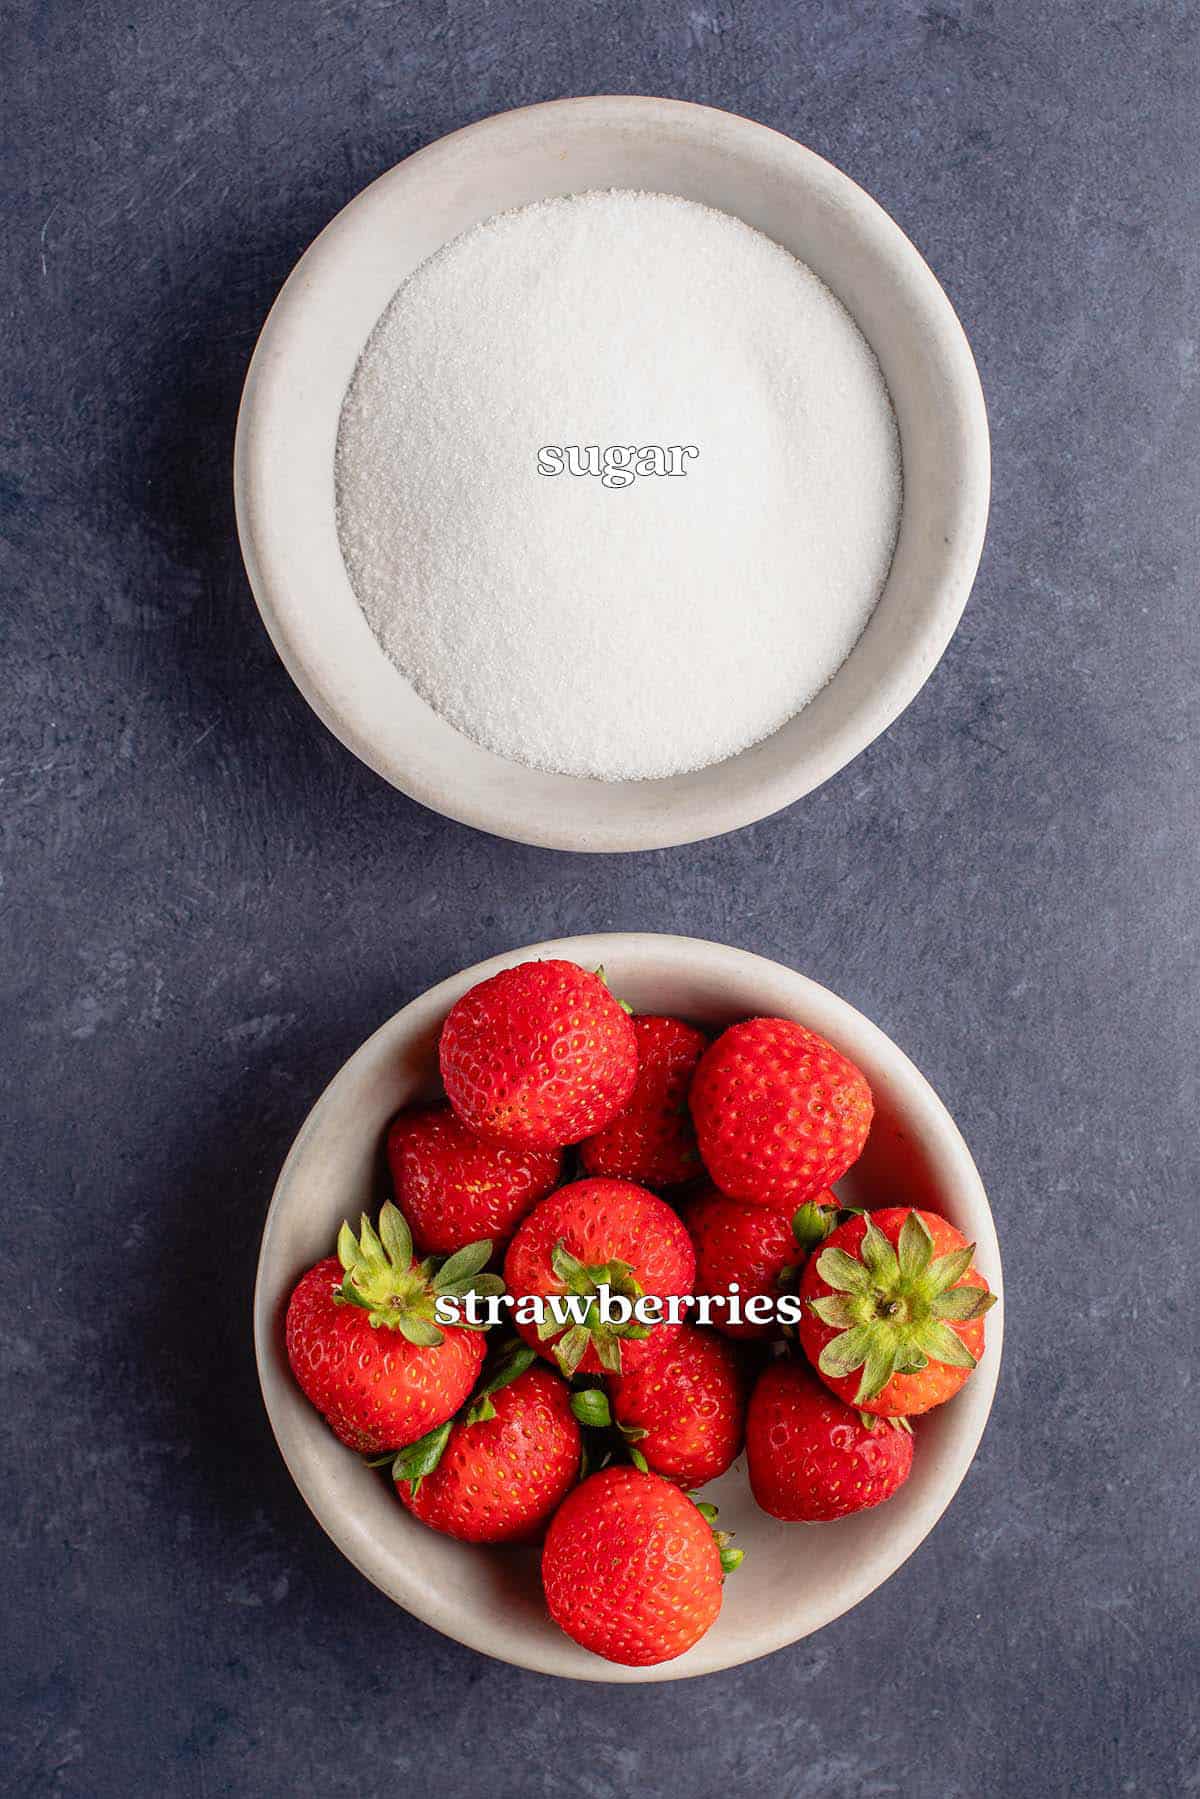 strawberries and sugar in bowls on blue board